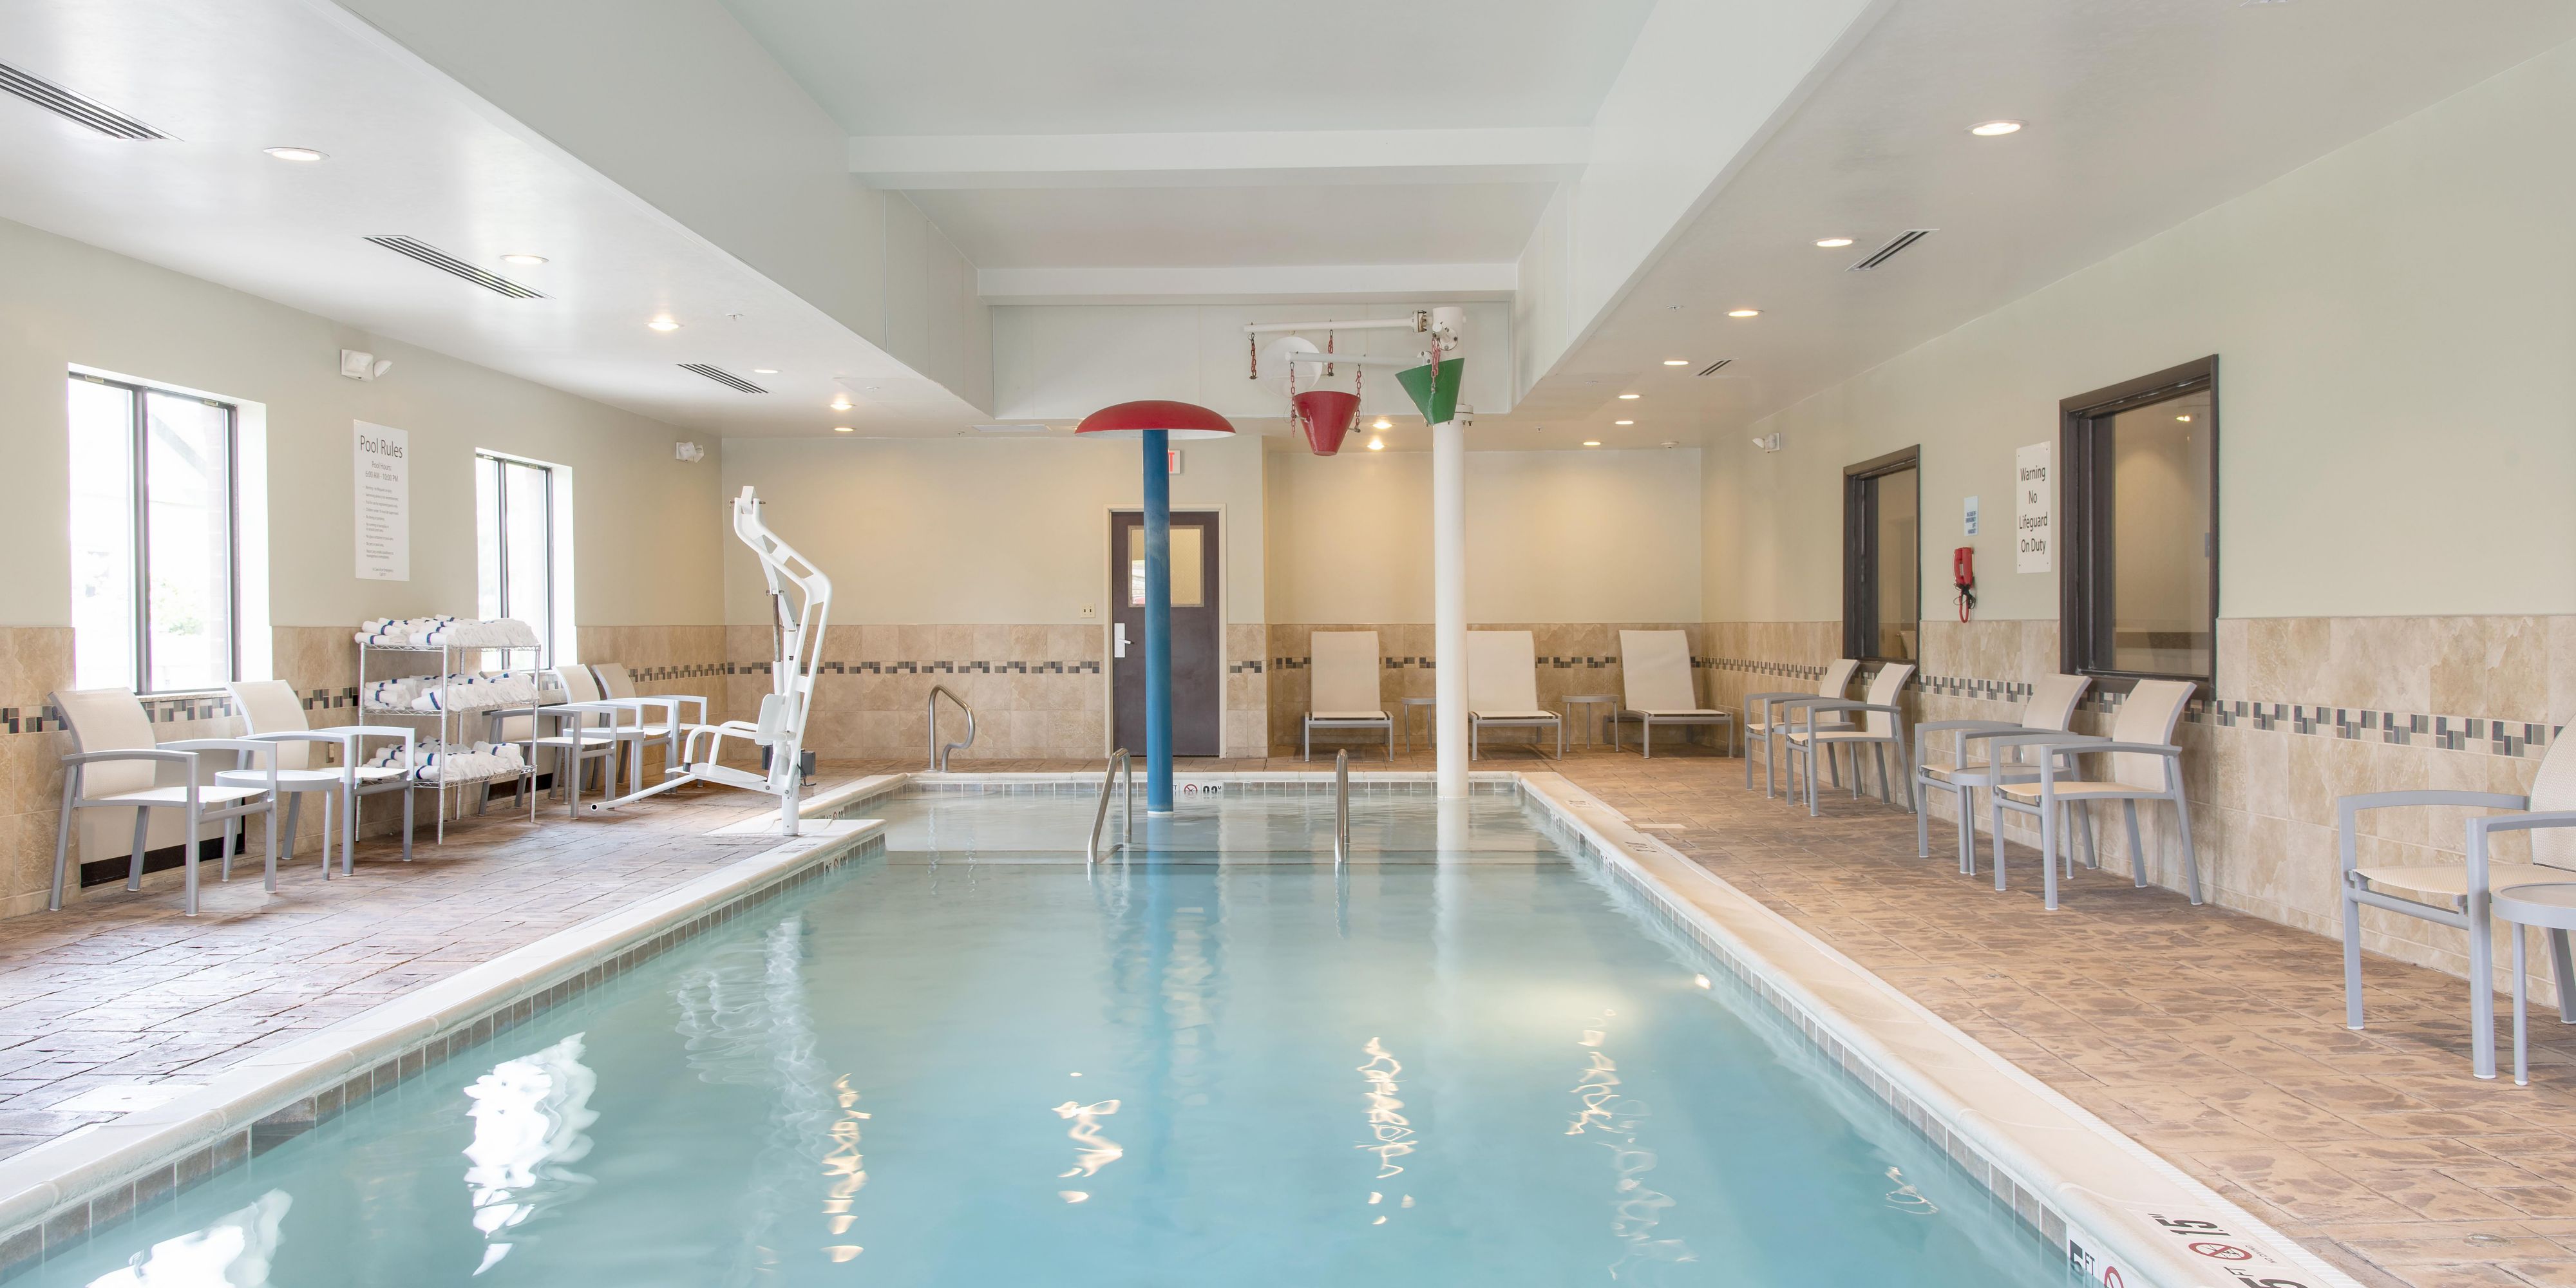 Heated indoor pool for guest use, by appointment. One hour increments- please reserve time upon arrival.